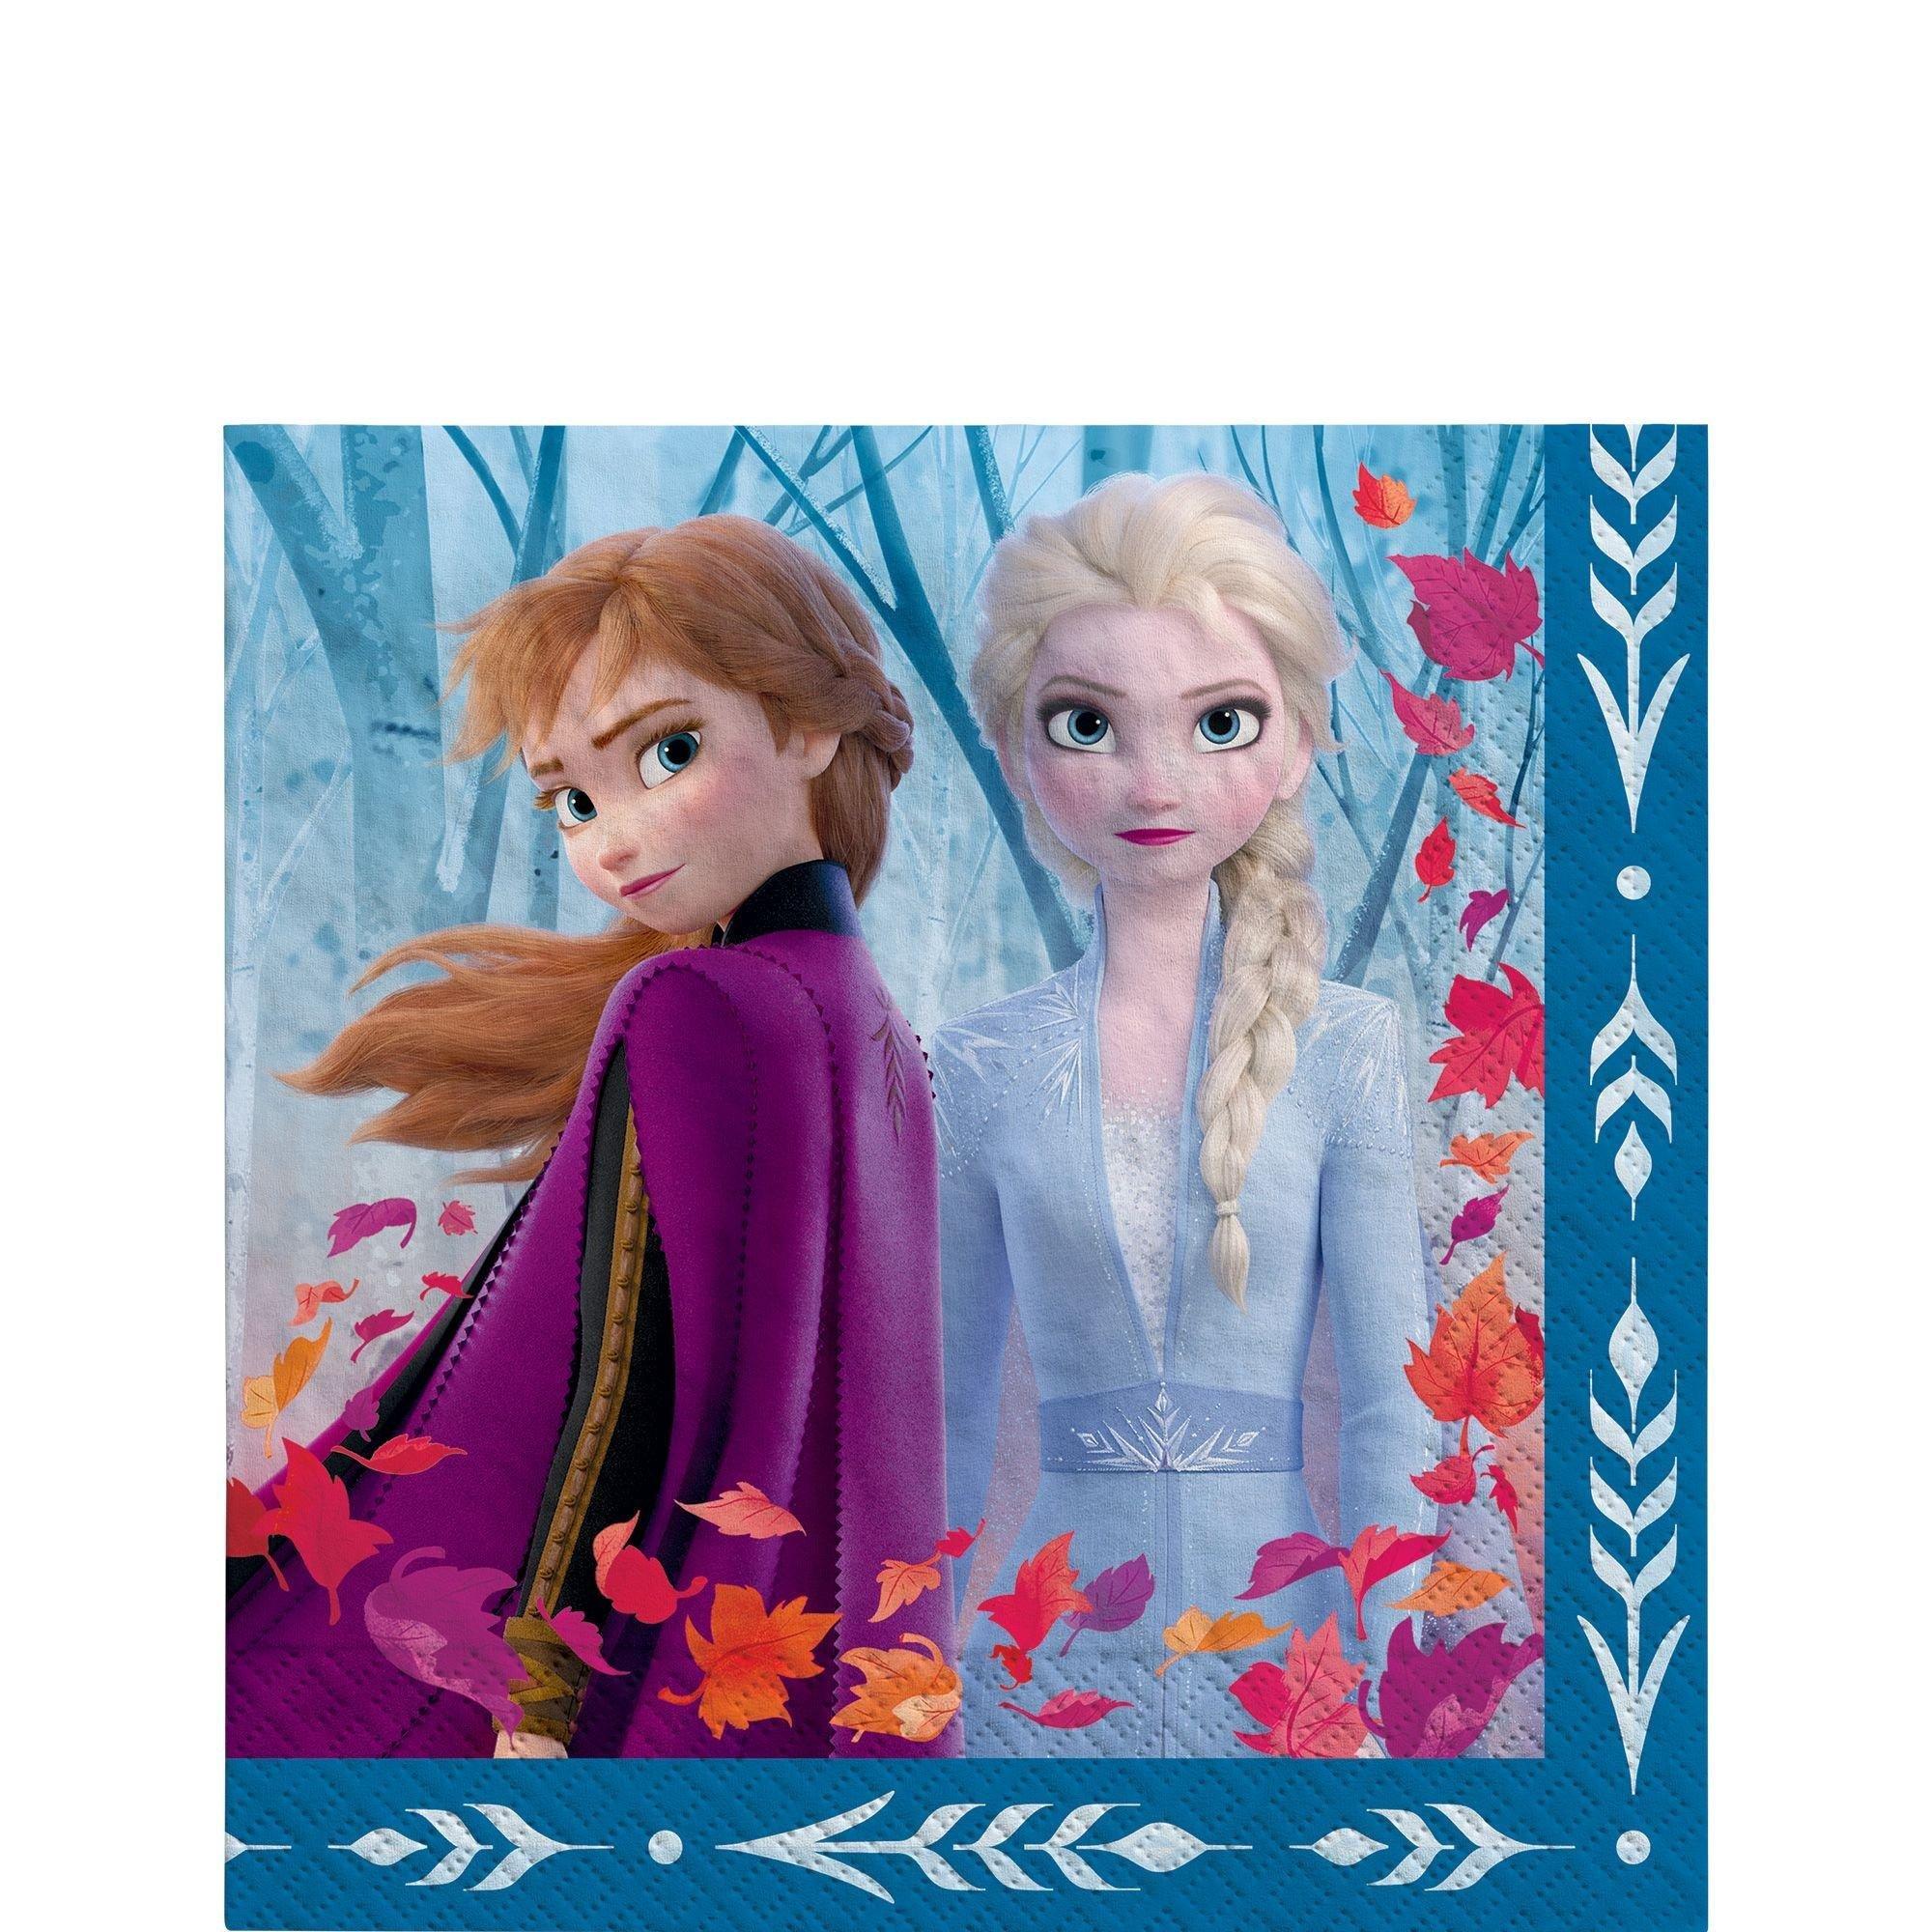 Frozen 2 Party Supplies Pack for 8 Guests - Kit Includes Plates, Napkins & Table Cover